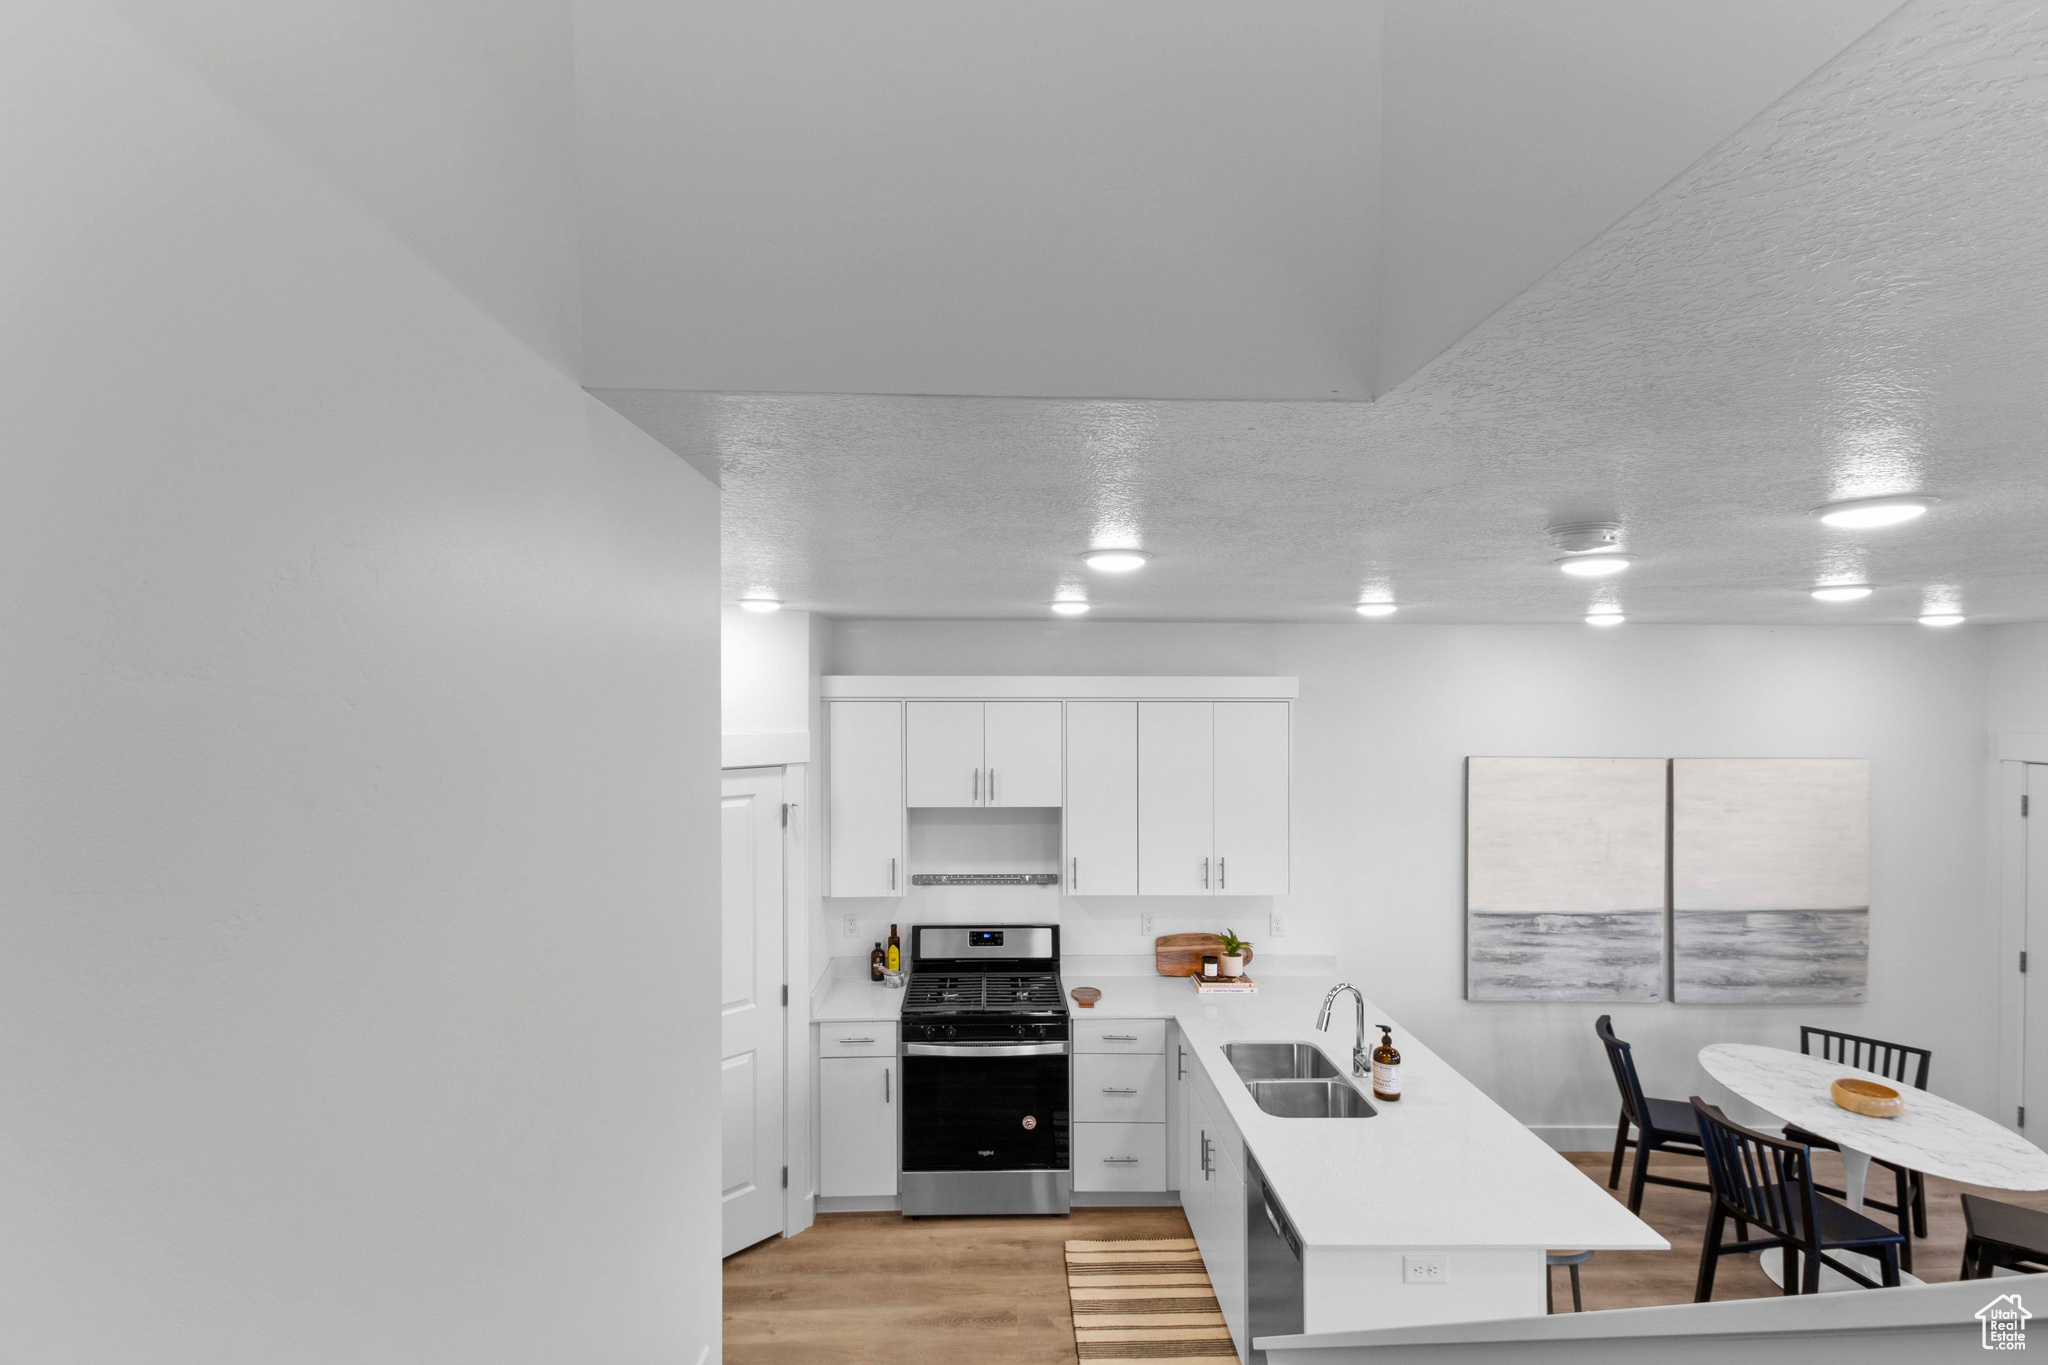 Kitchen featuring white cabinets, light hardwood / wood-style flooring, sink, stainless steel range with electric cooktop, and a textured ceiling